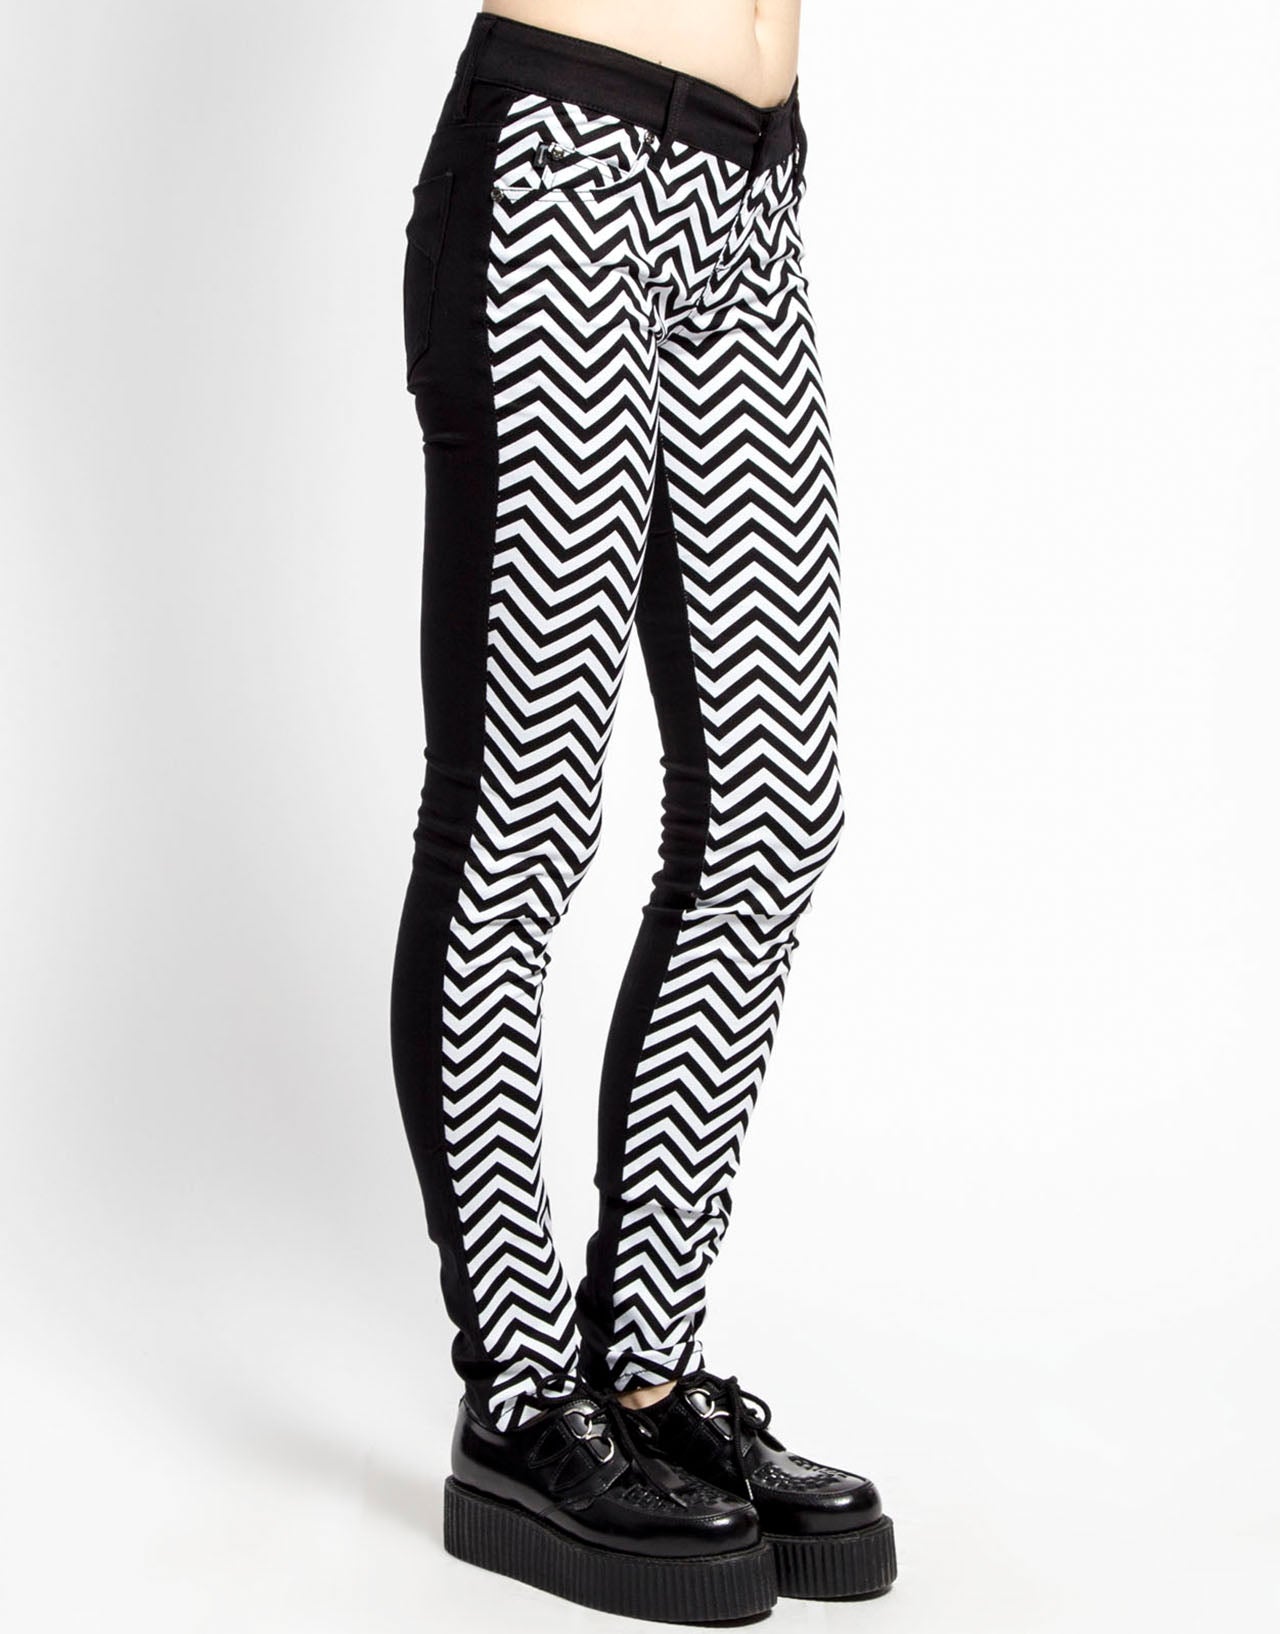 Coming and Going Jeans Zig Zag Print